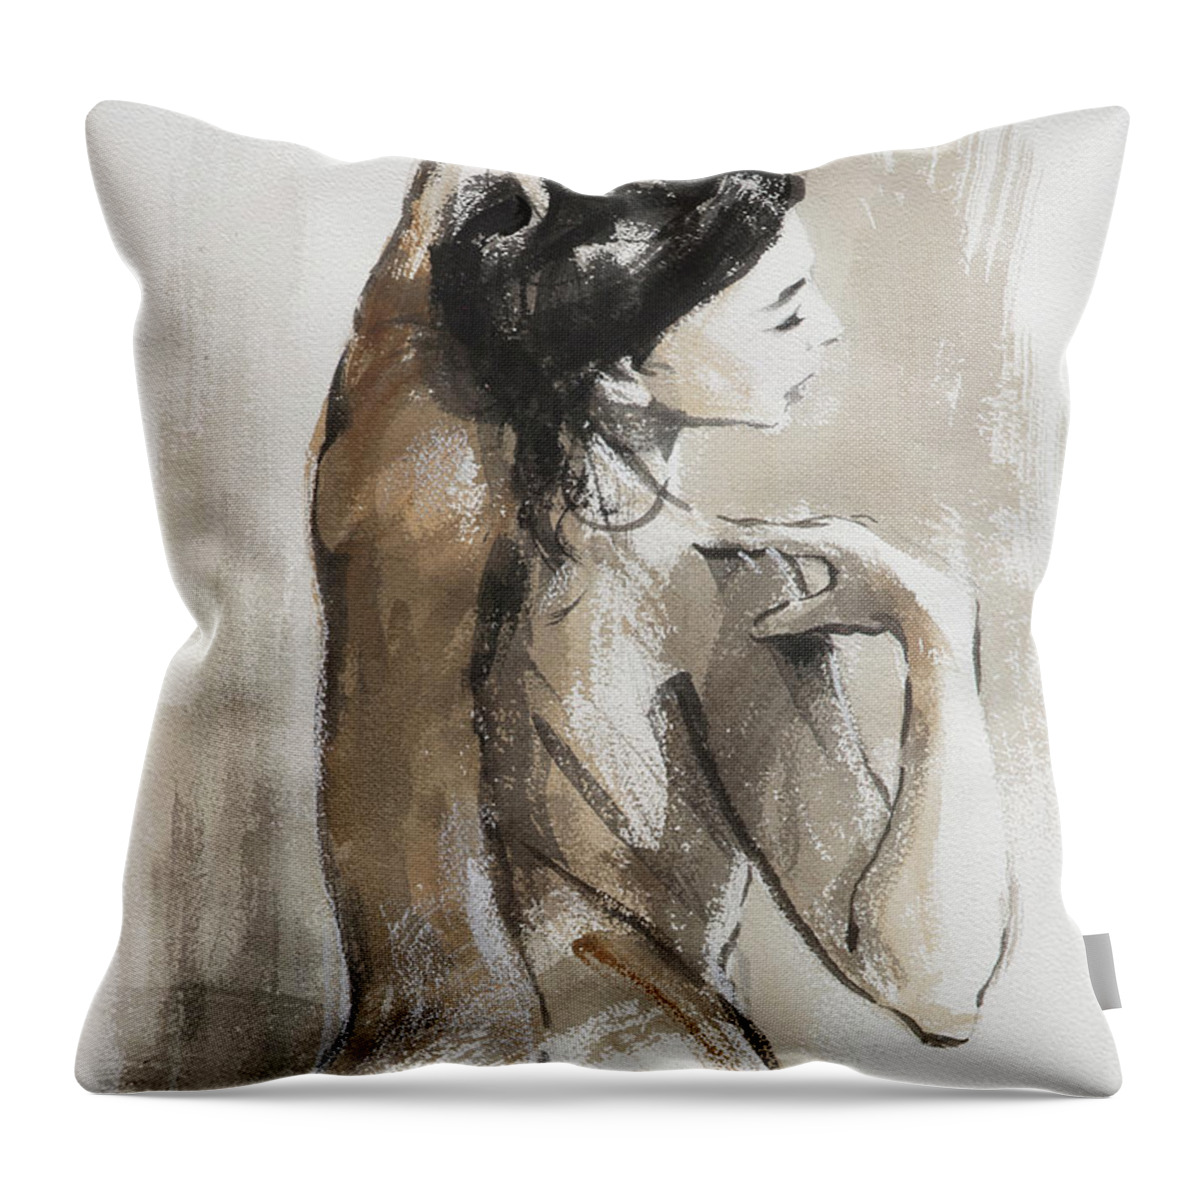 Woman Throw Pillow featuring the painting Expression by Steve Henderson